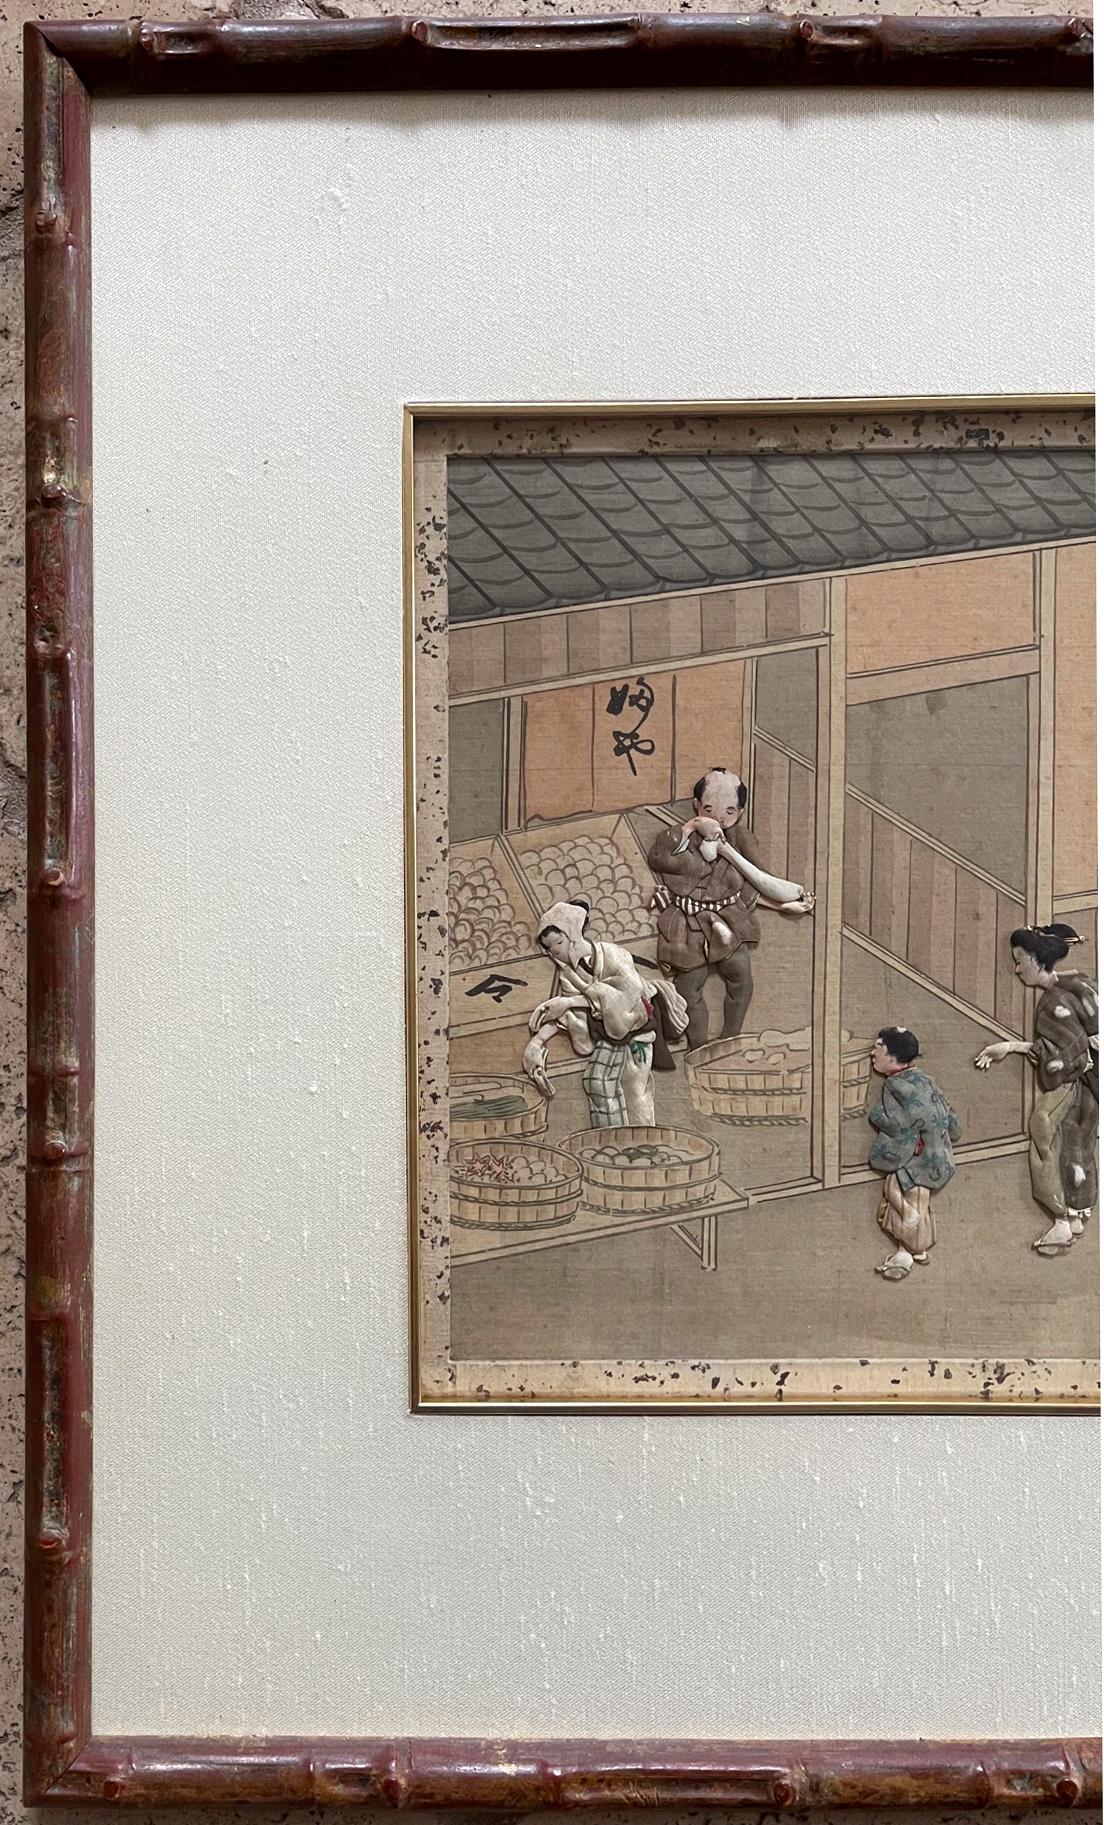 On offer is one of the set of seven framed Japanese textile art called Oshi-E circa Meiji Period (1868-1912). This rare set consists of seven panels depicting various aspects of daily life in Edo time with stunning details. These snapshots of